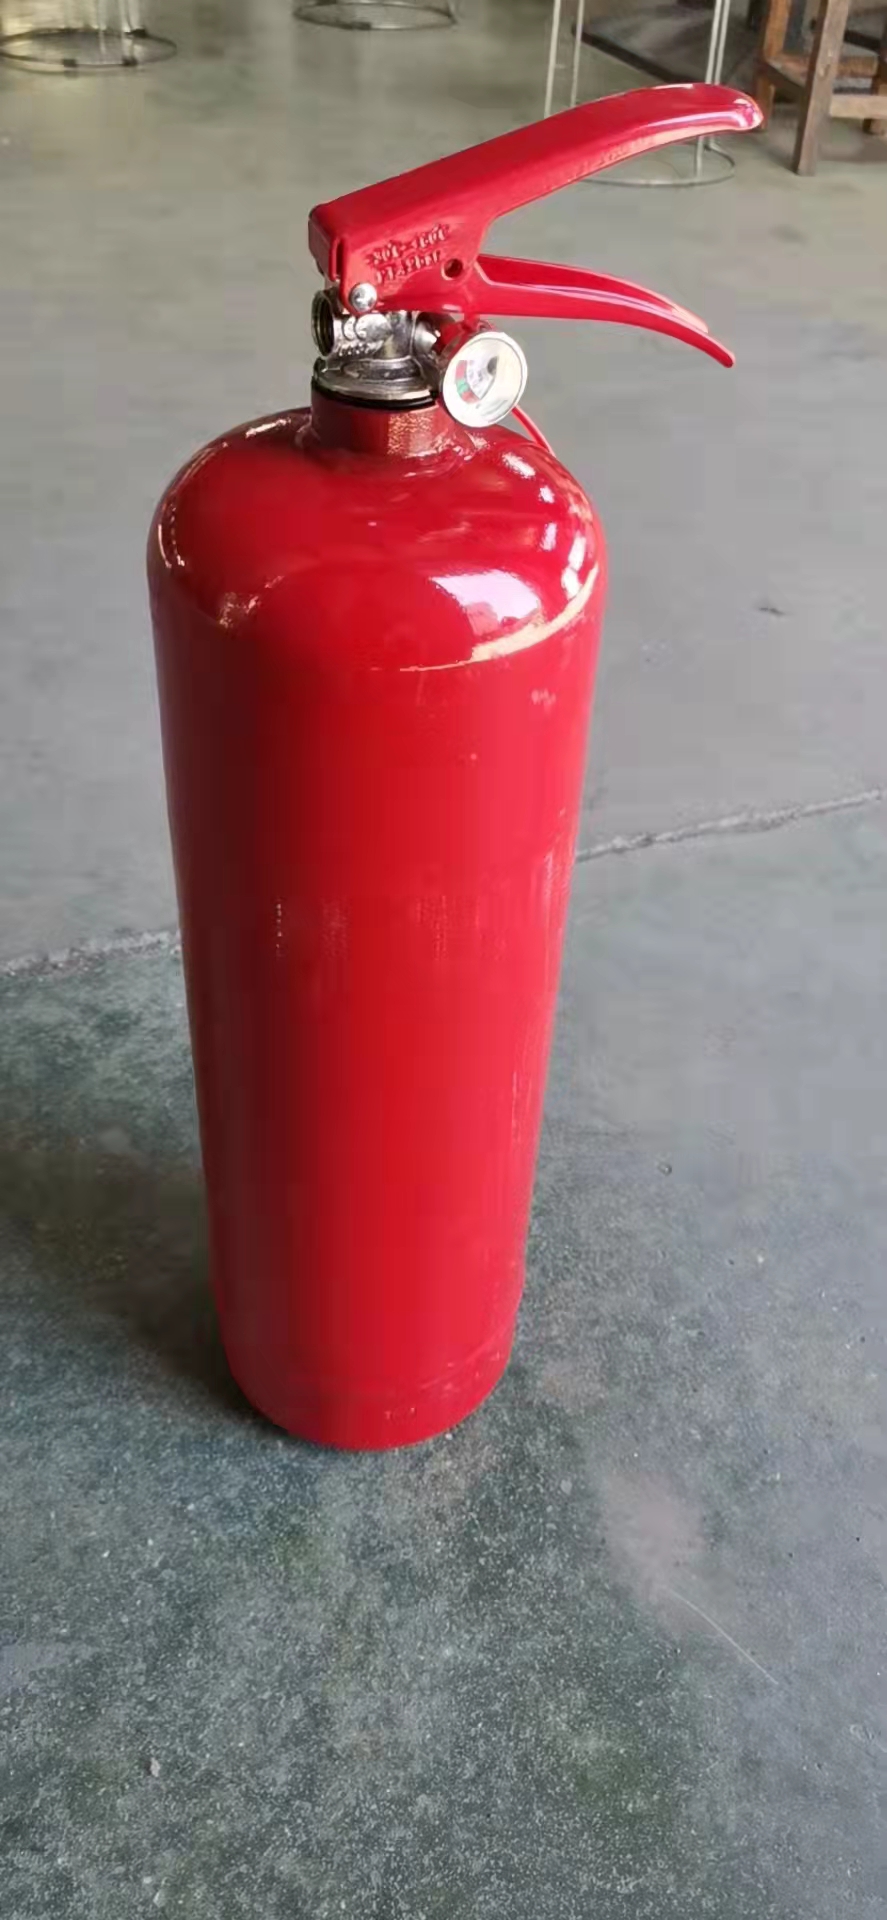 6kg Dry Powder Fire Extinguisher for Wood With Brass Valve